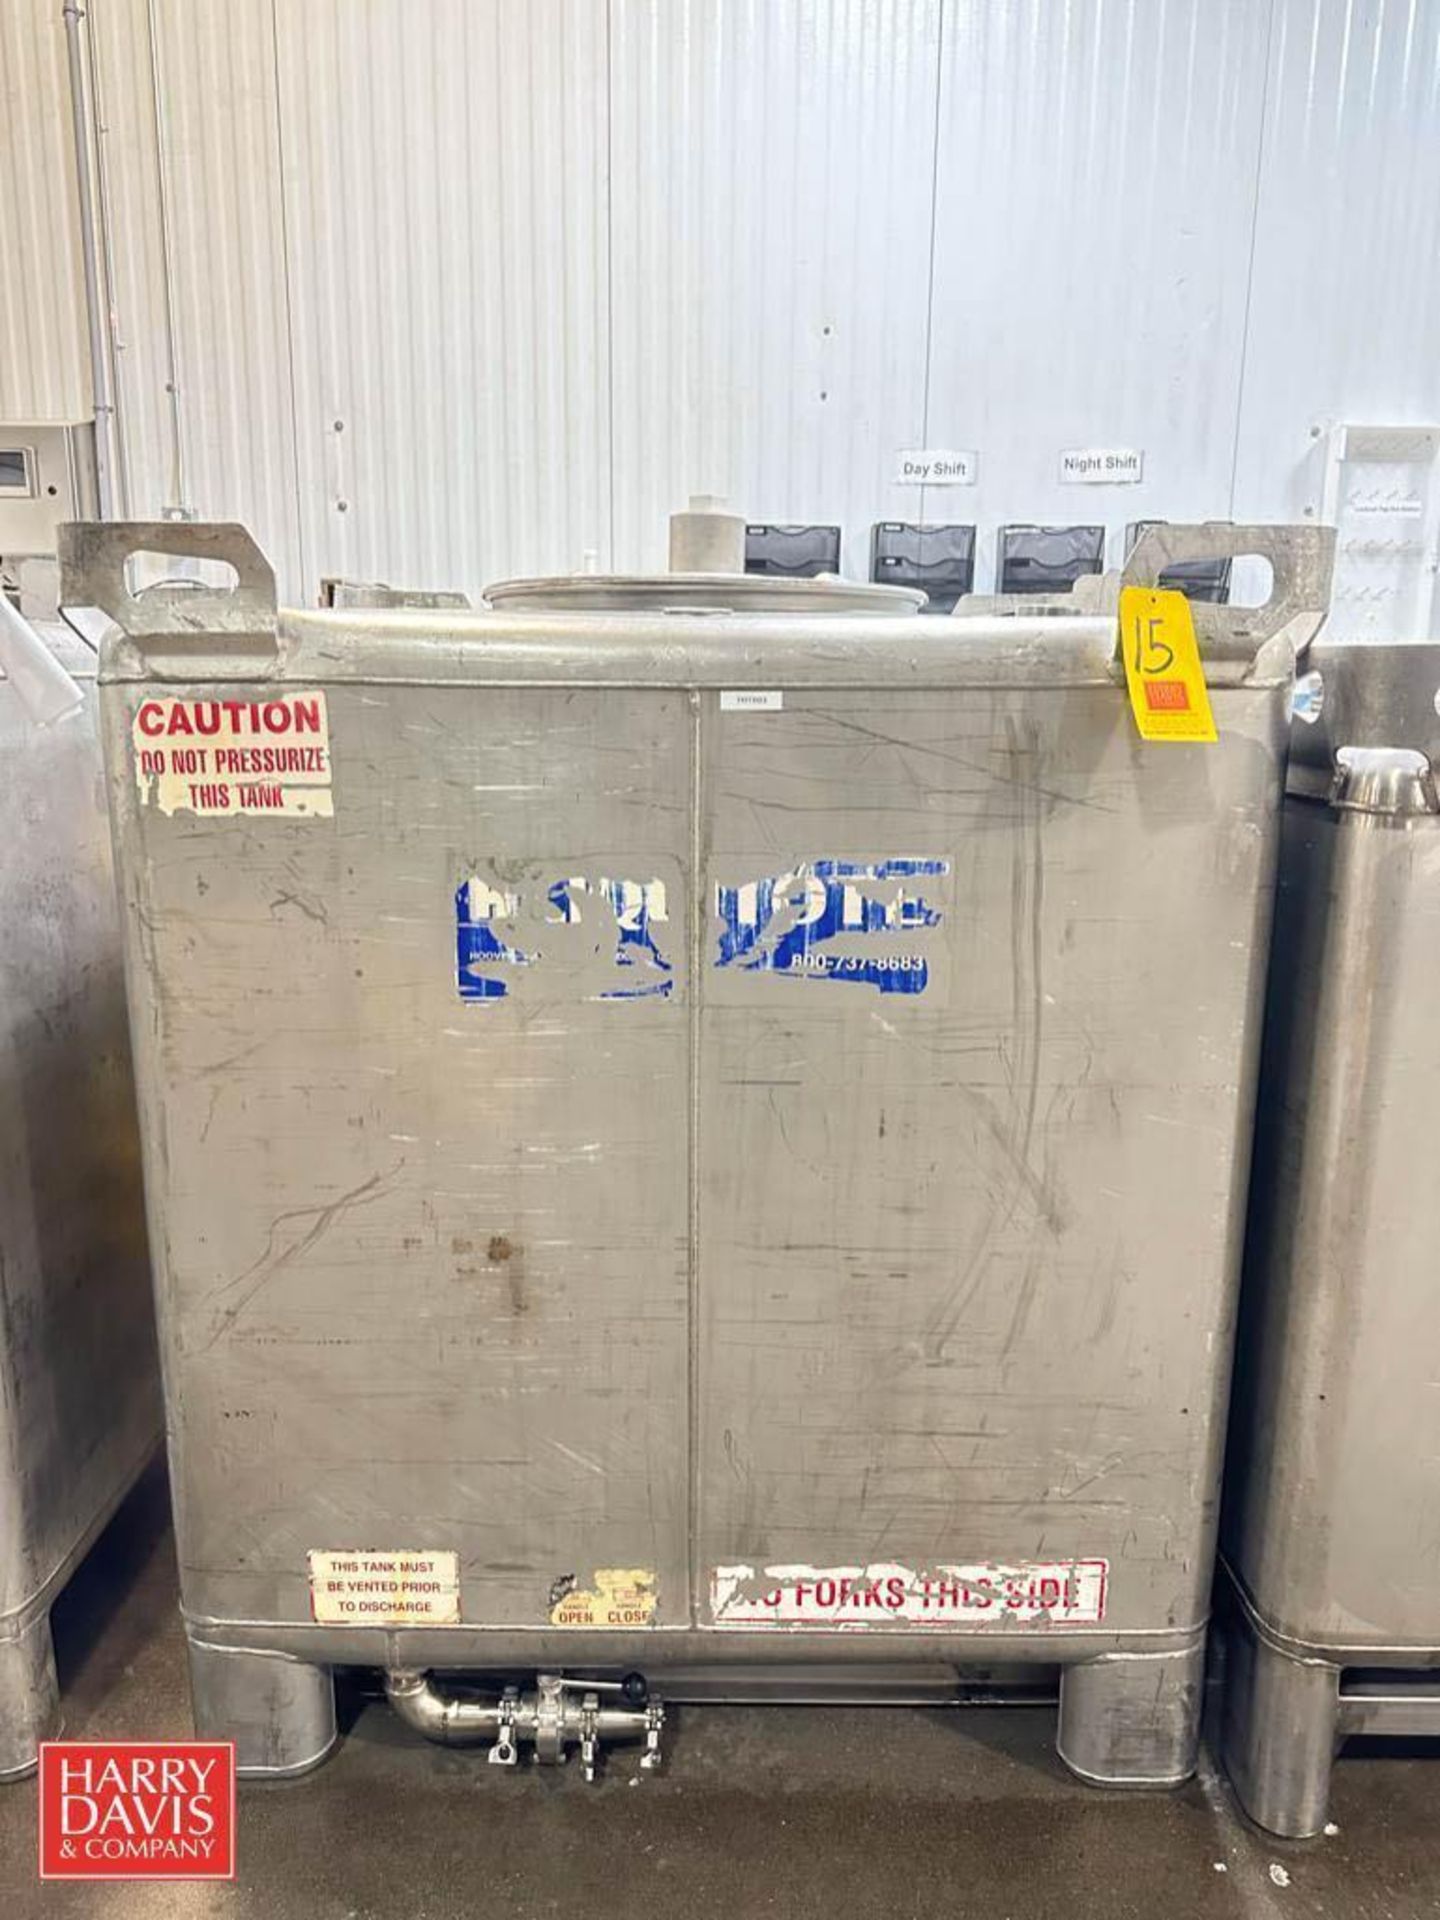 LiquiTote 400 Gallon 316L S/S IBC Tote with S/S Butterfly Valve - Rigging Fee: $125